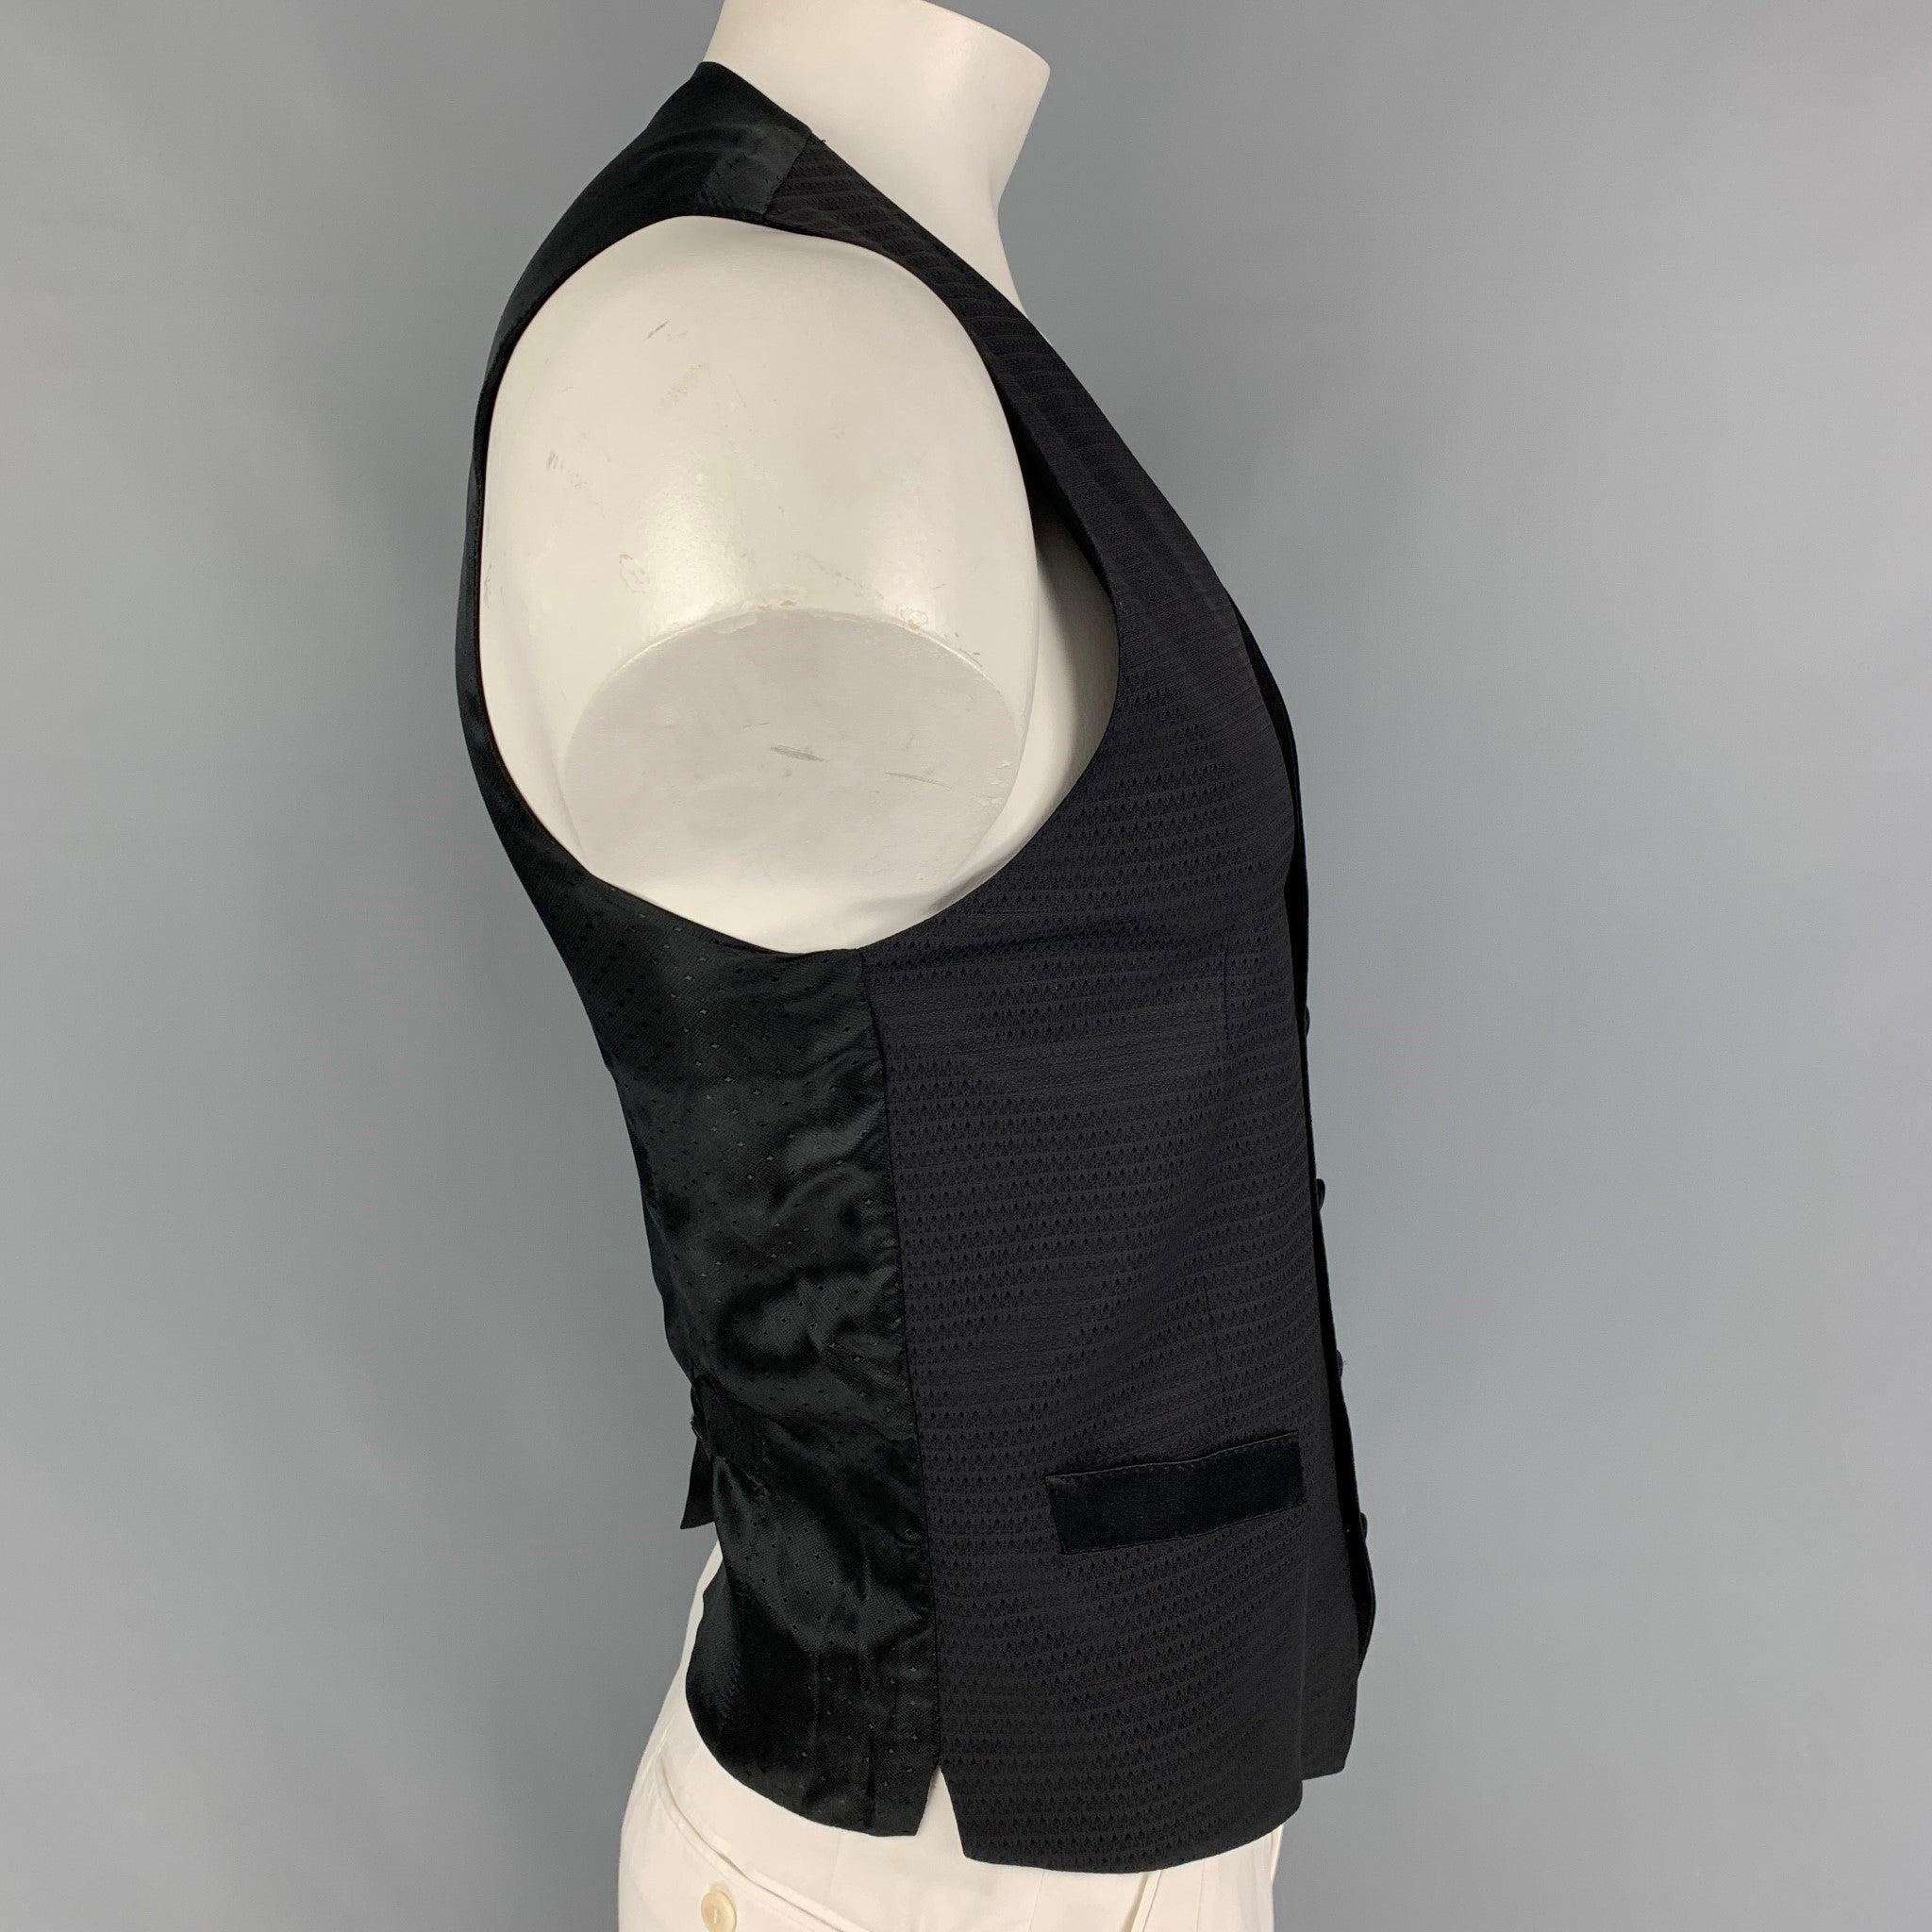 DOLCE & GABBANA vest comes in a black jacquard wool blend featuring a back belt, slit pockets, and a buttoned closure. Made in Italy.
Very Good
Pre-Owned Condition. 

Marked:   52 

Measurements: 
 
Shoulder: 15 inches  Chest:
38 inches  Length: